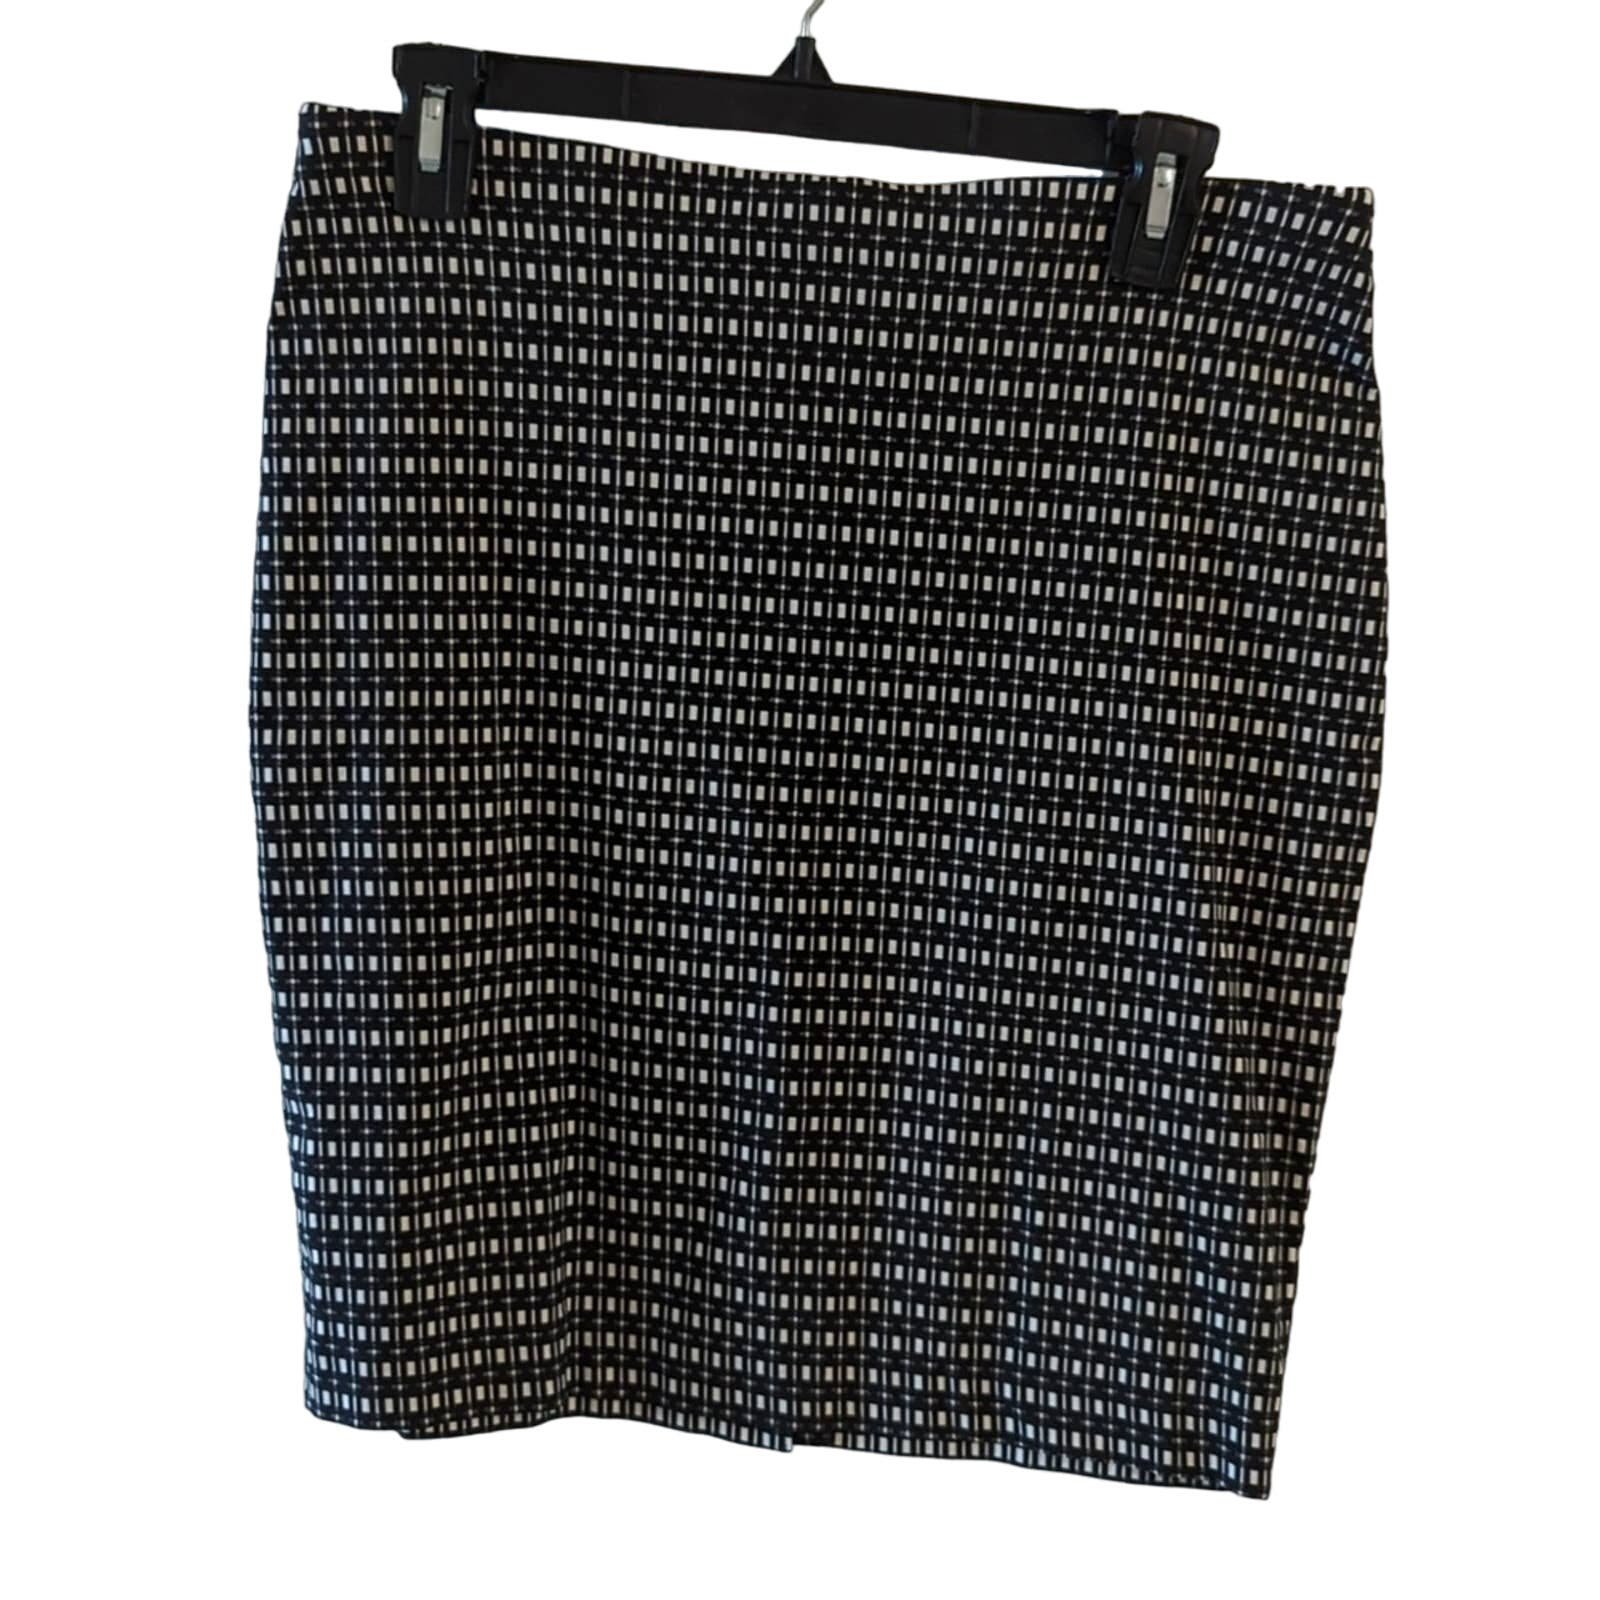 Discounted EUC NYCC Pencil Skirt, M fkenlYxB7 Outlet St